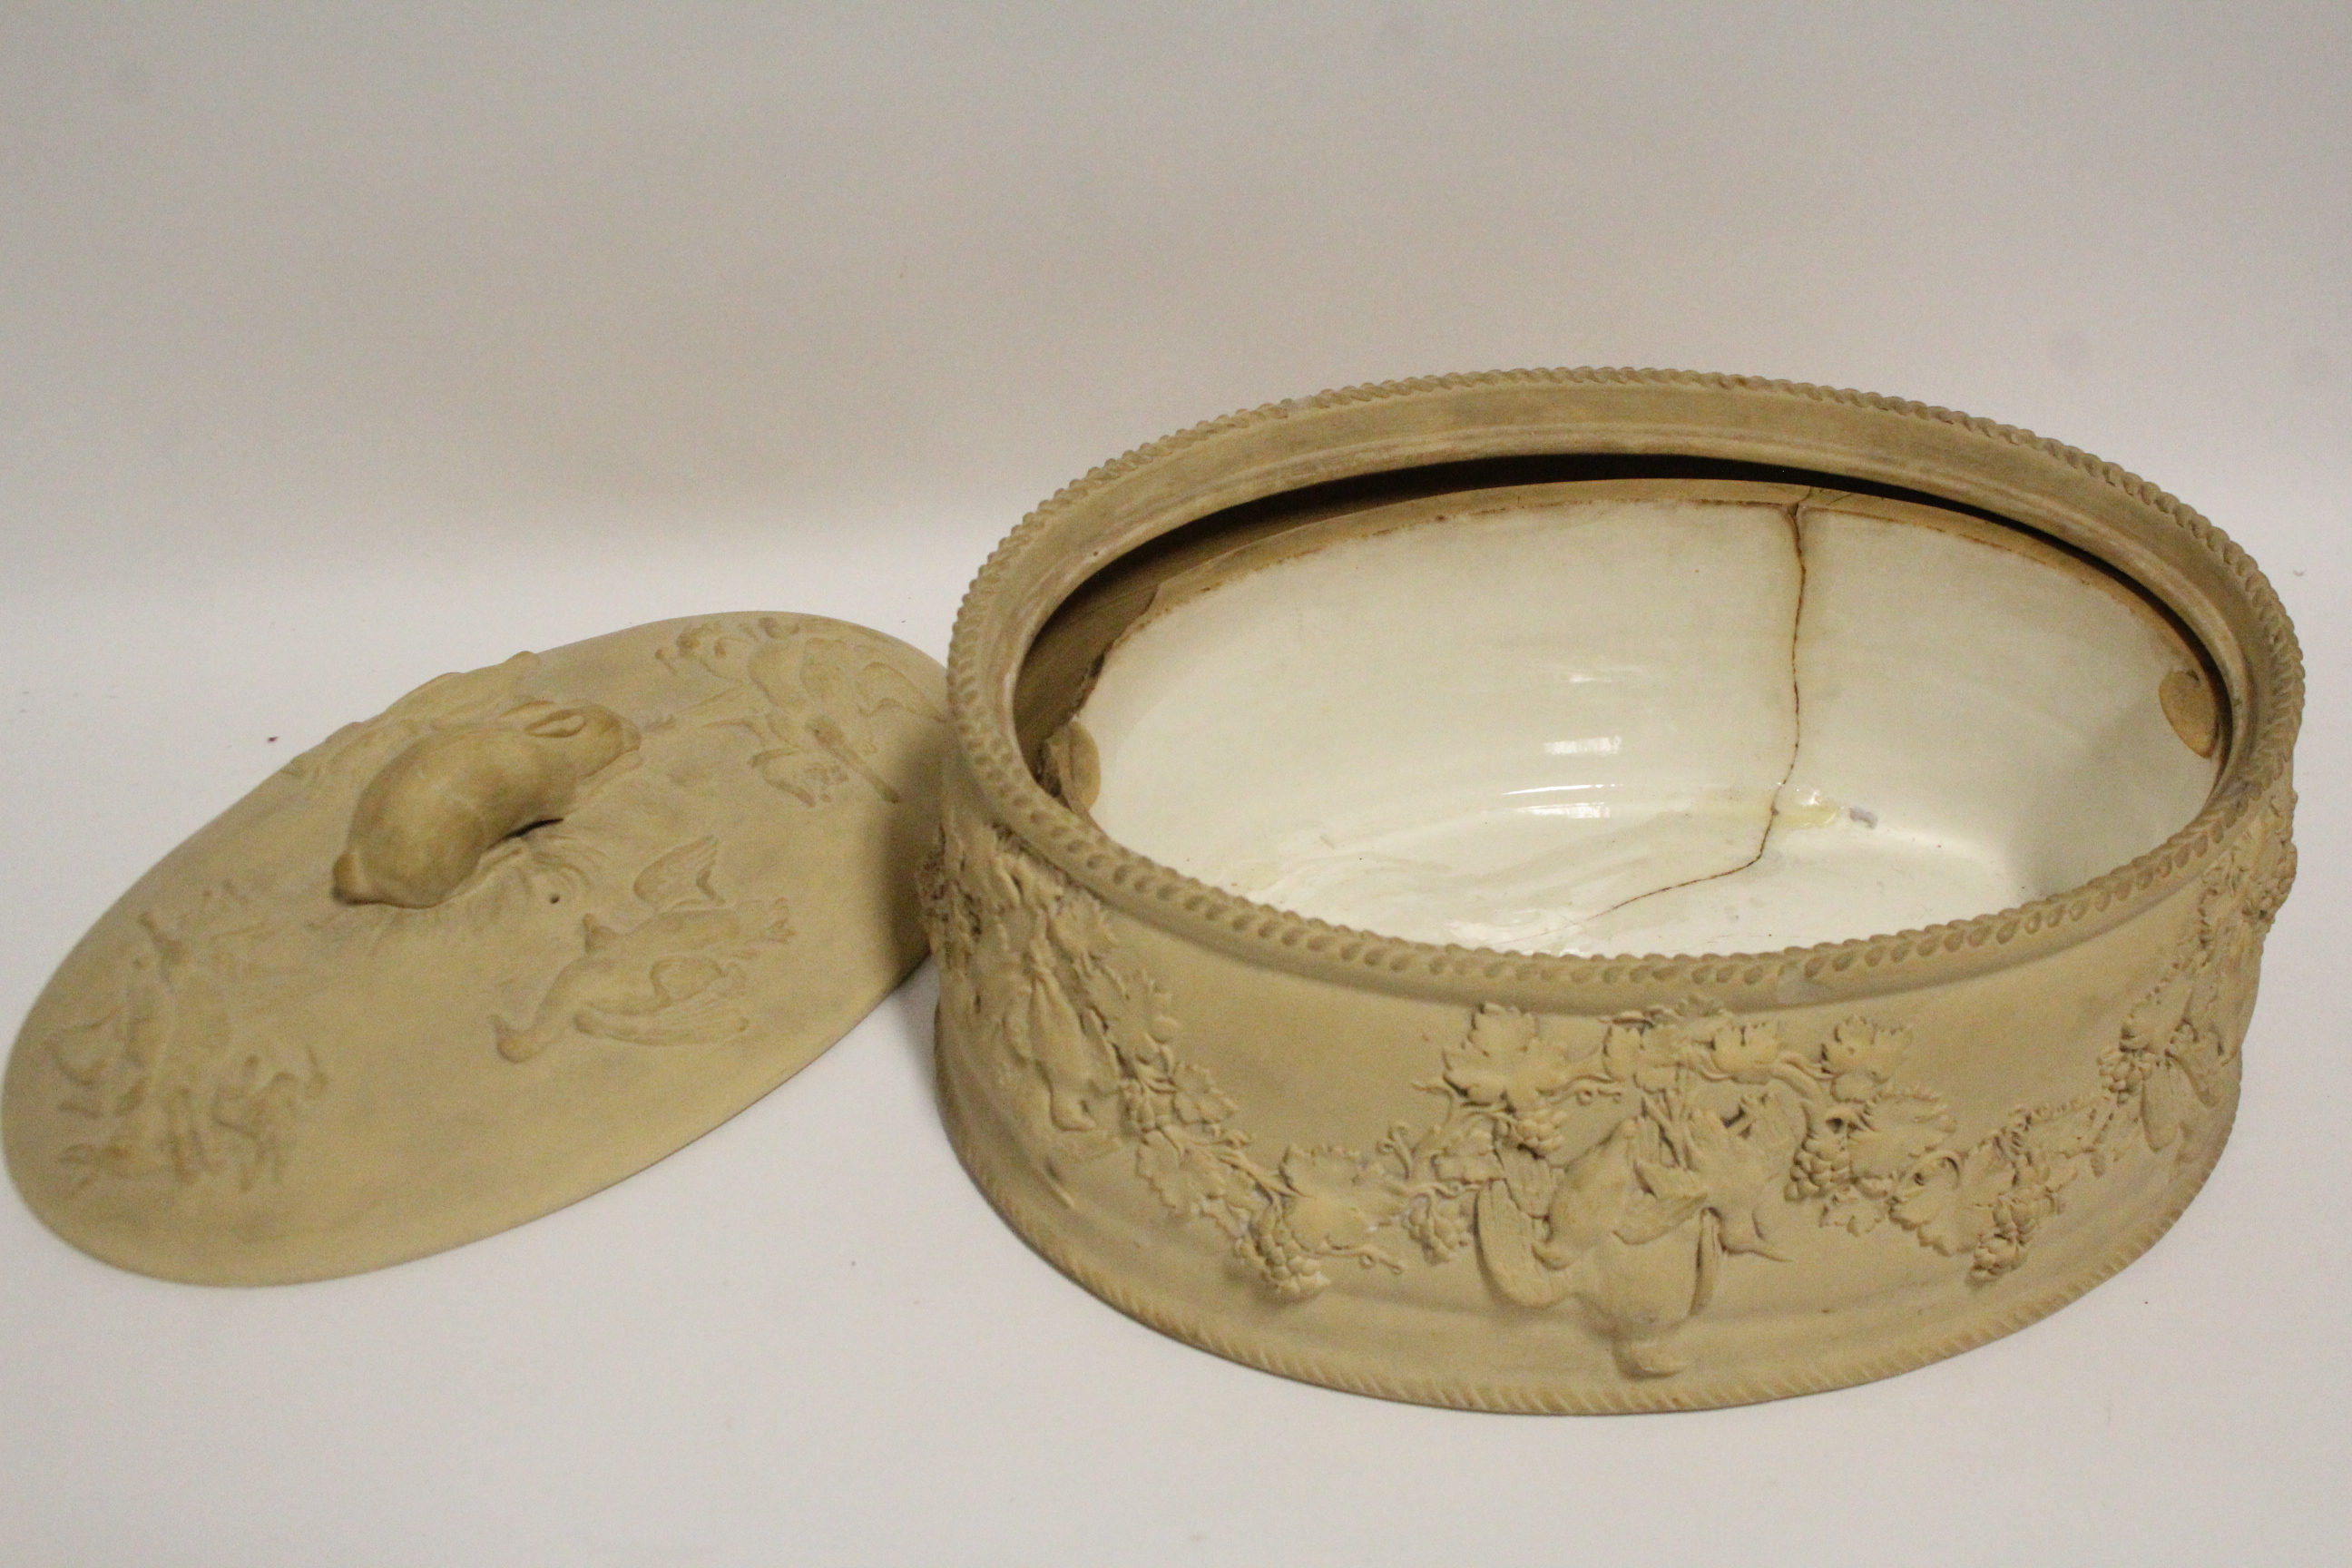 A 19th century Wedgwood caneware oval pie tureen with relief decoration of game birds & - Image 3 of 5